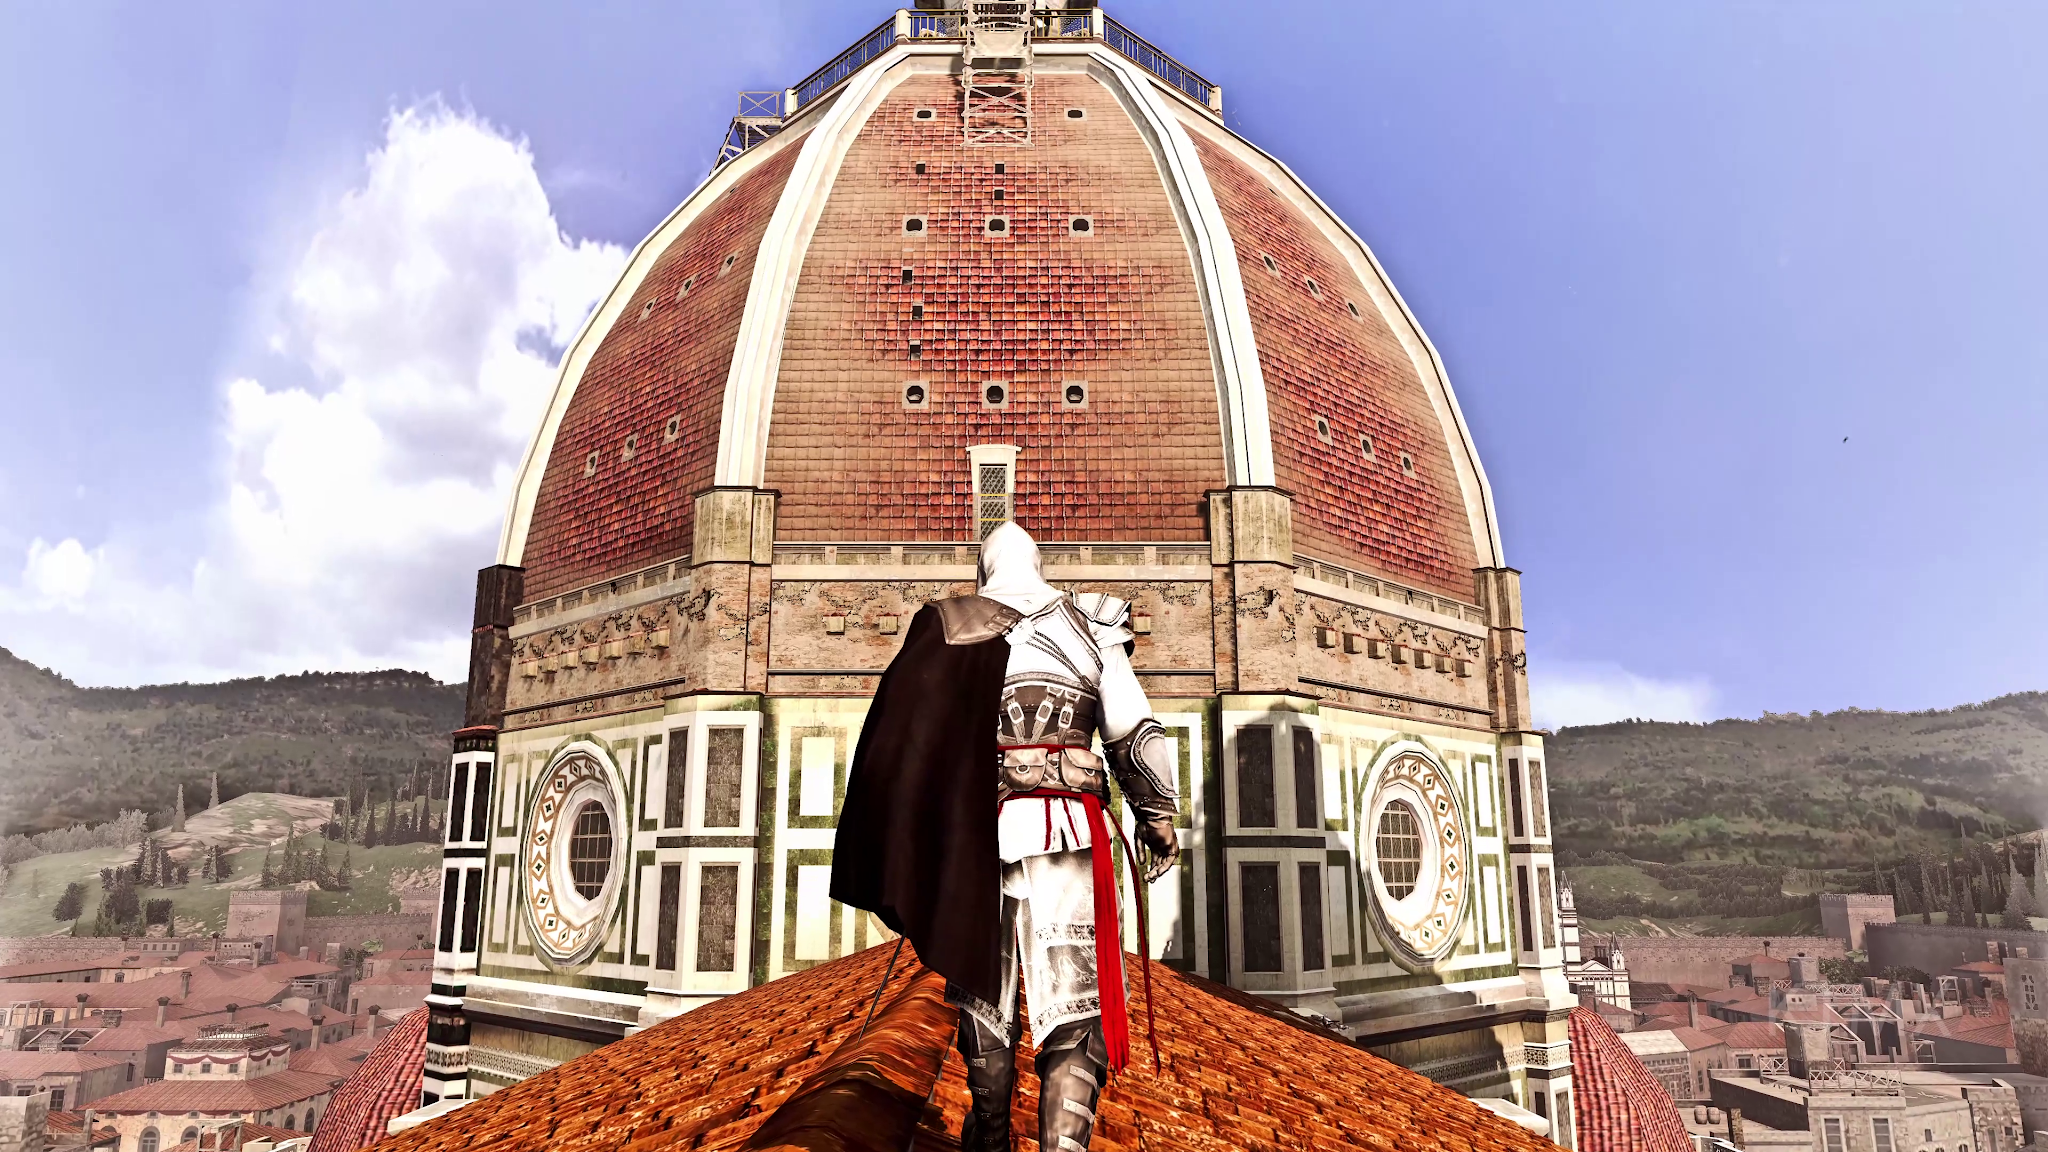 AC1 CryNation  The Perfect Lighting Graphics Mod + Texture mod for Assassin's  Creed 1 - Download Page